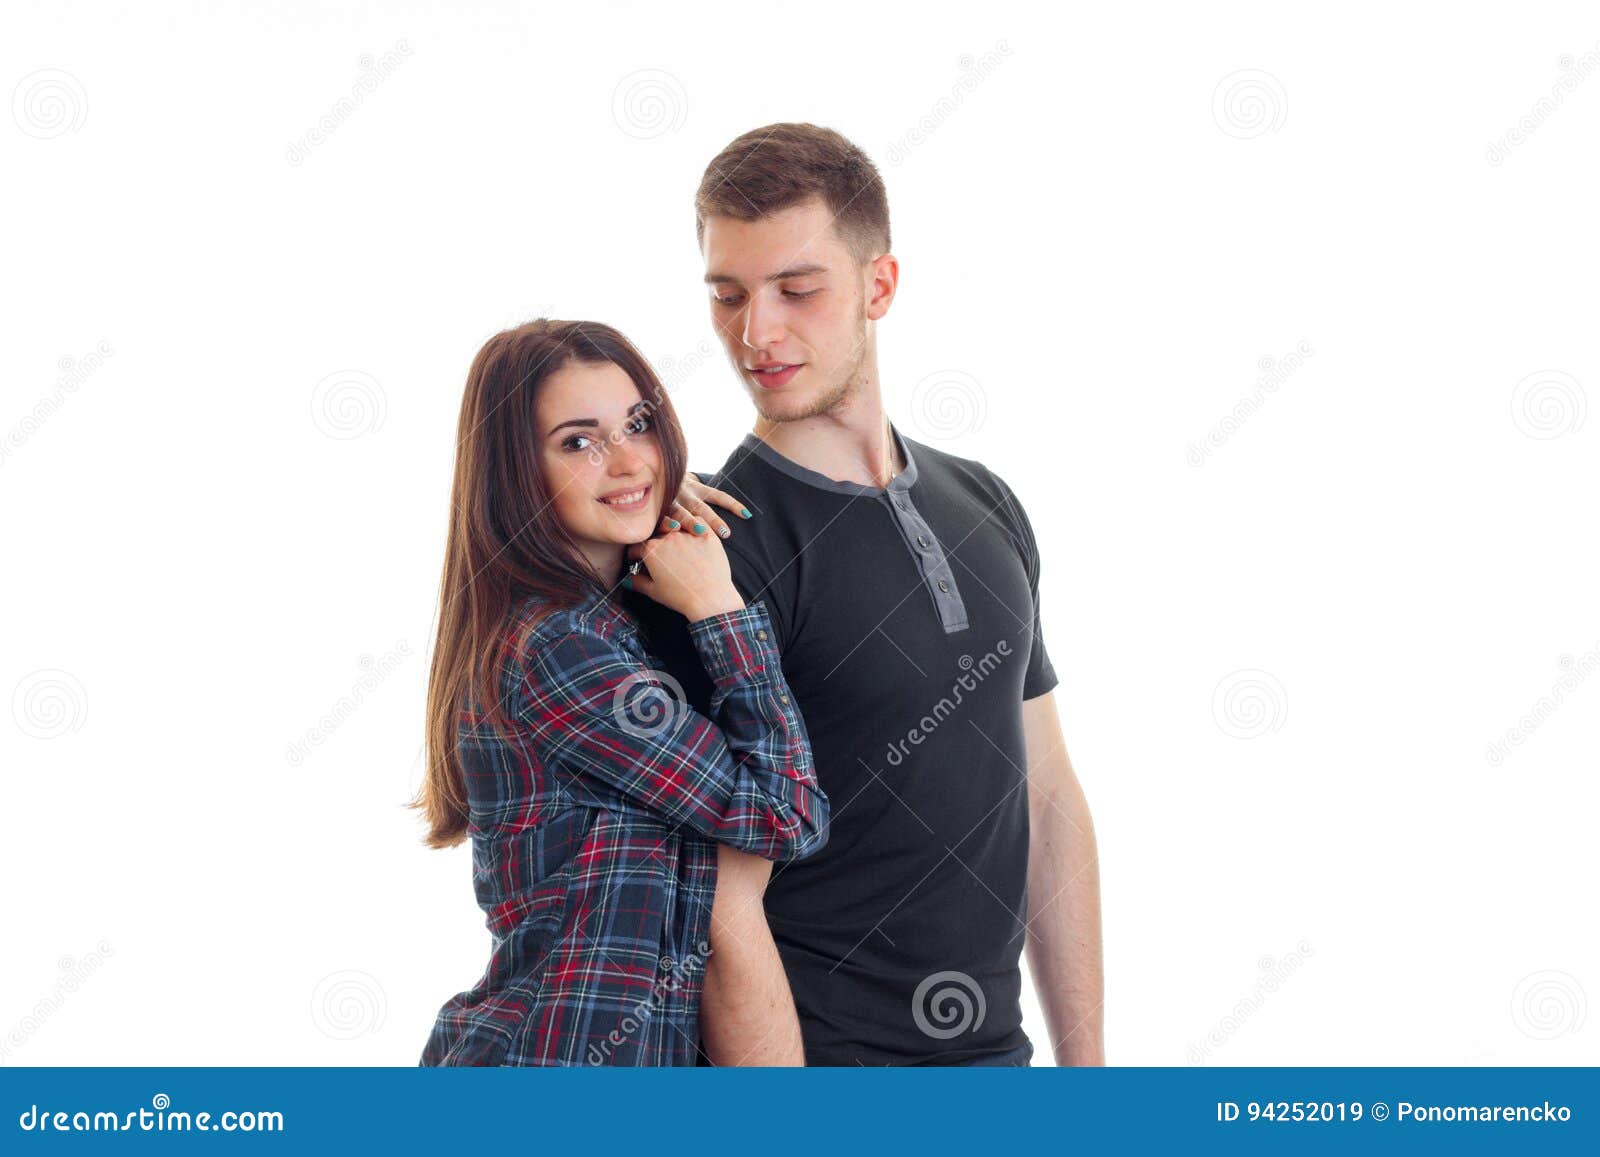 Wonderful Cute Couple Stand In The Studio And Posing For The